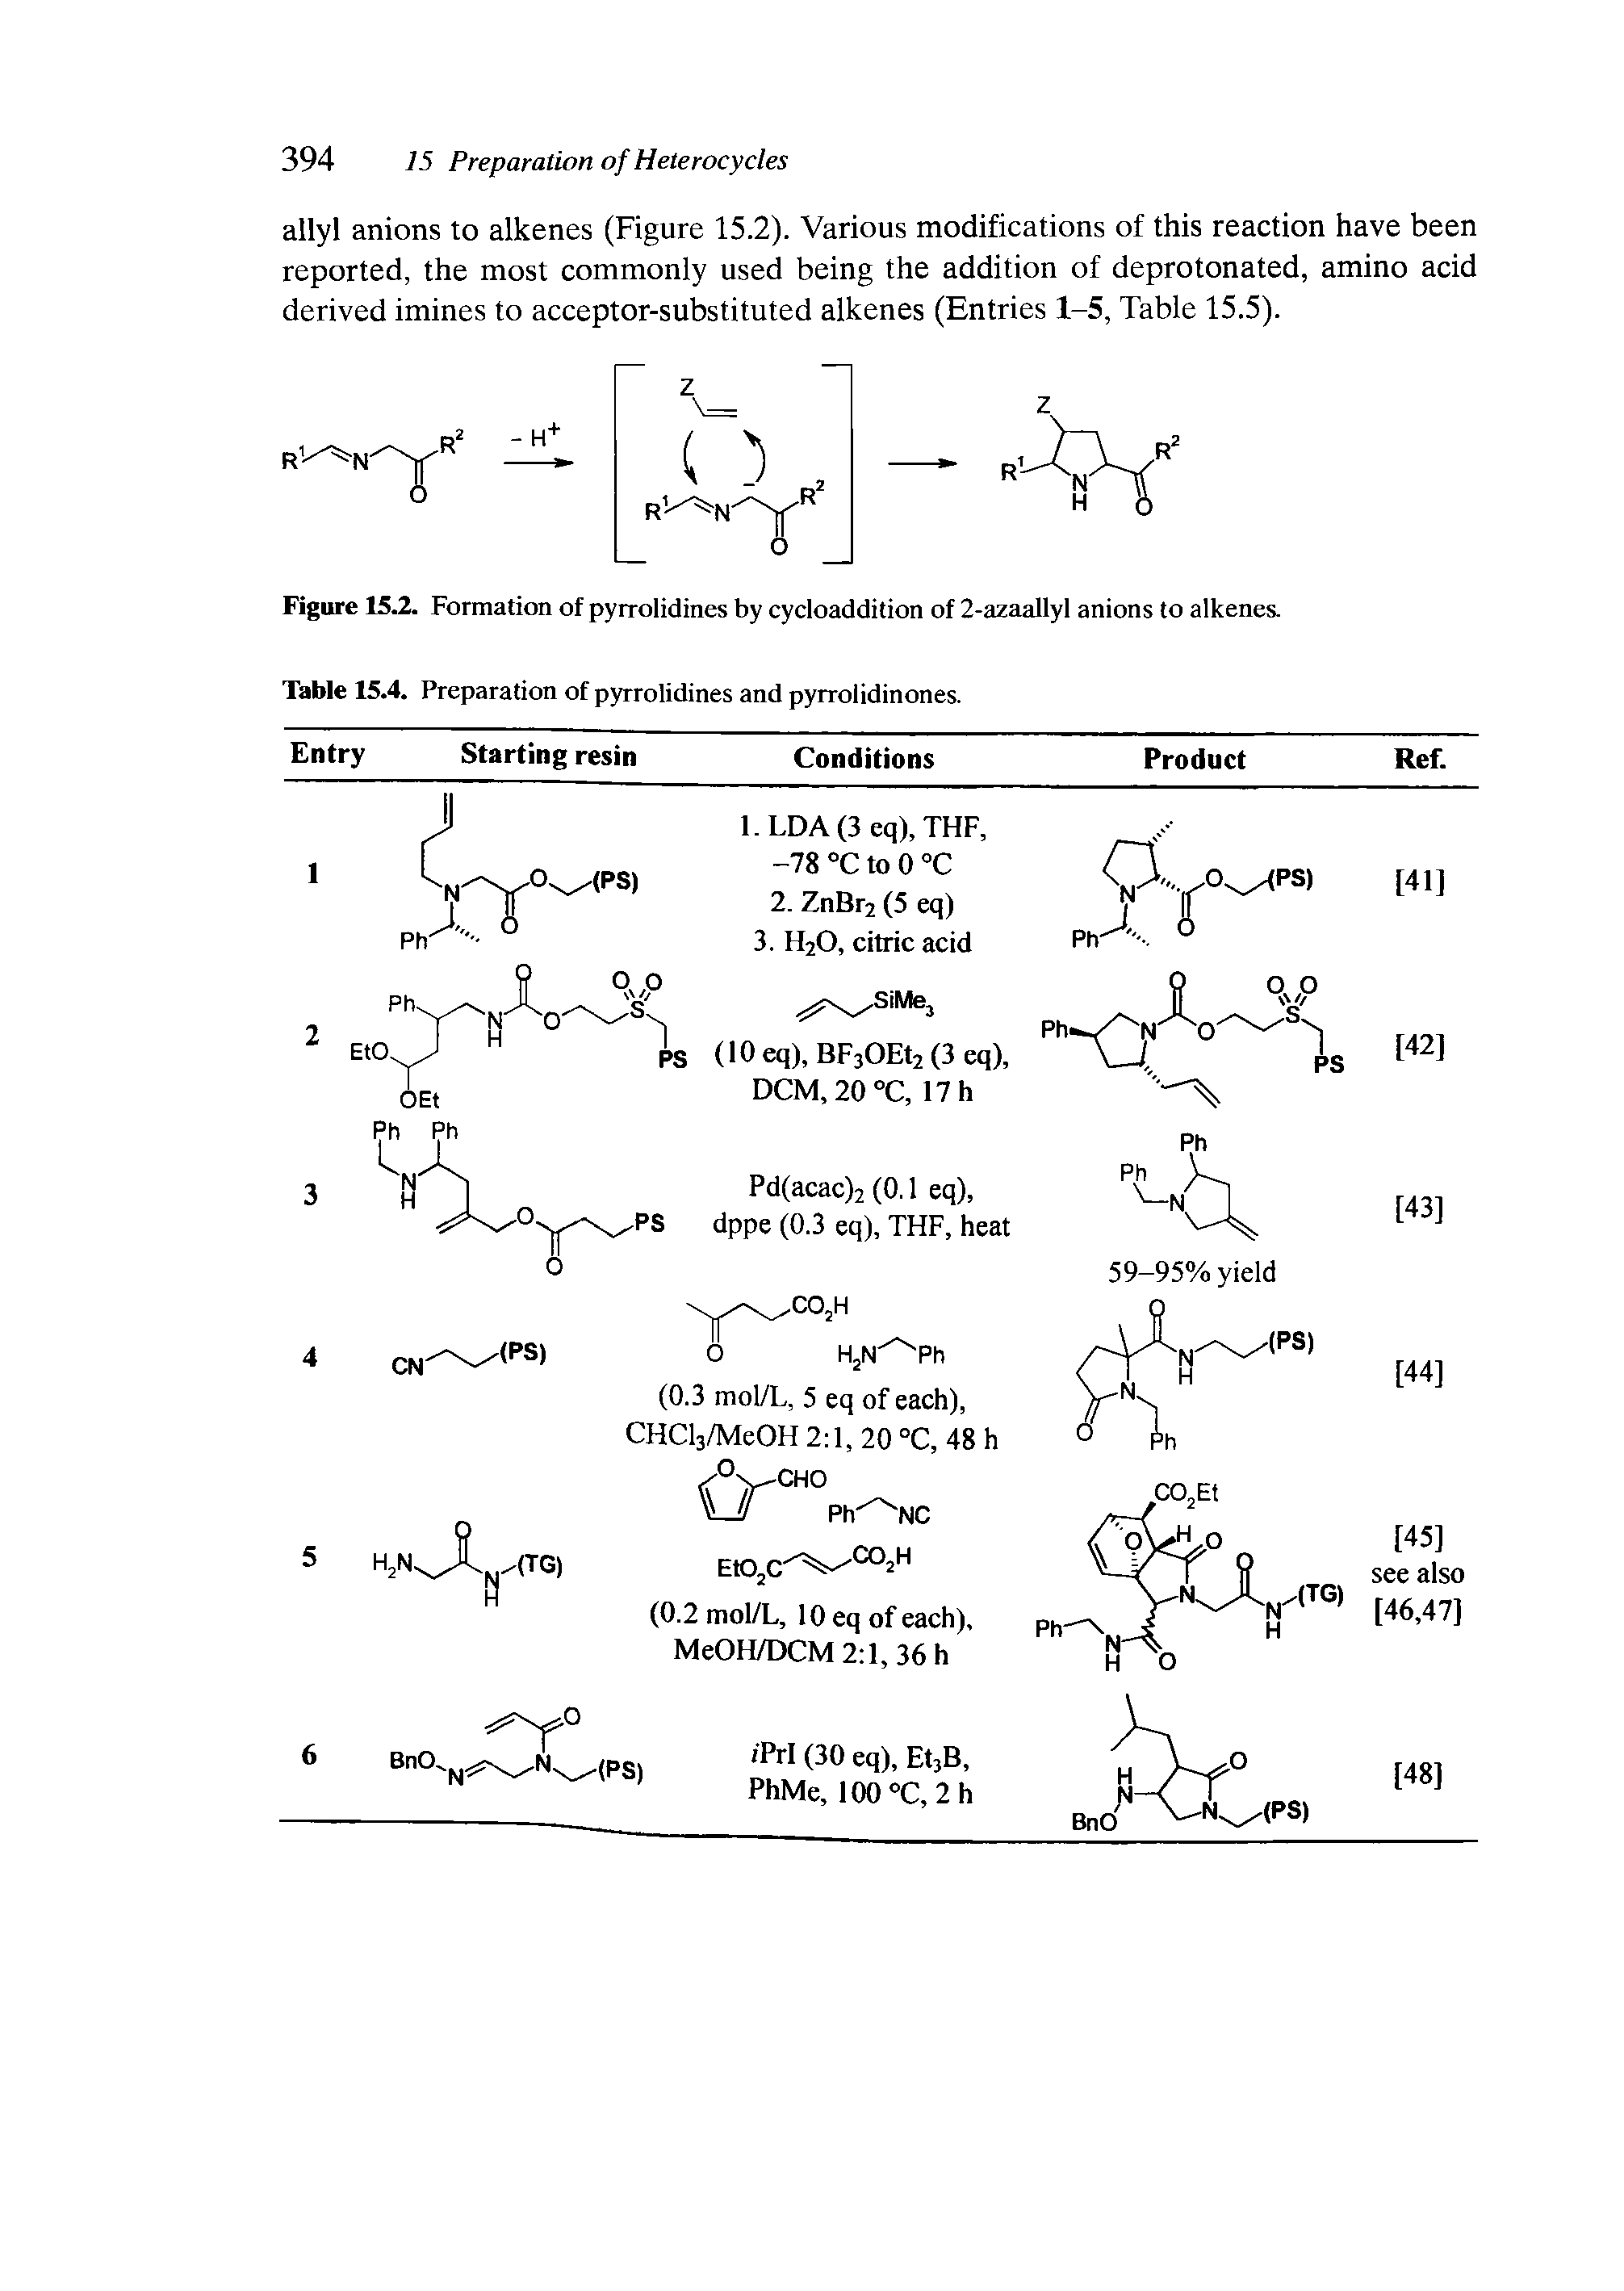 Figure 15.2. Formation of pyrrolidines by cycloaddition of 2-azaallyl anions to alkenes.